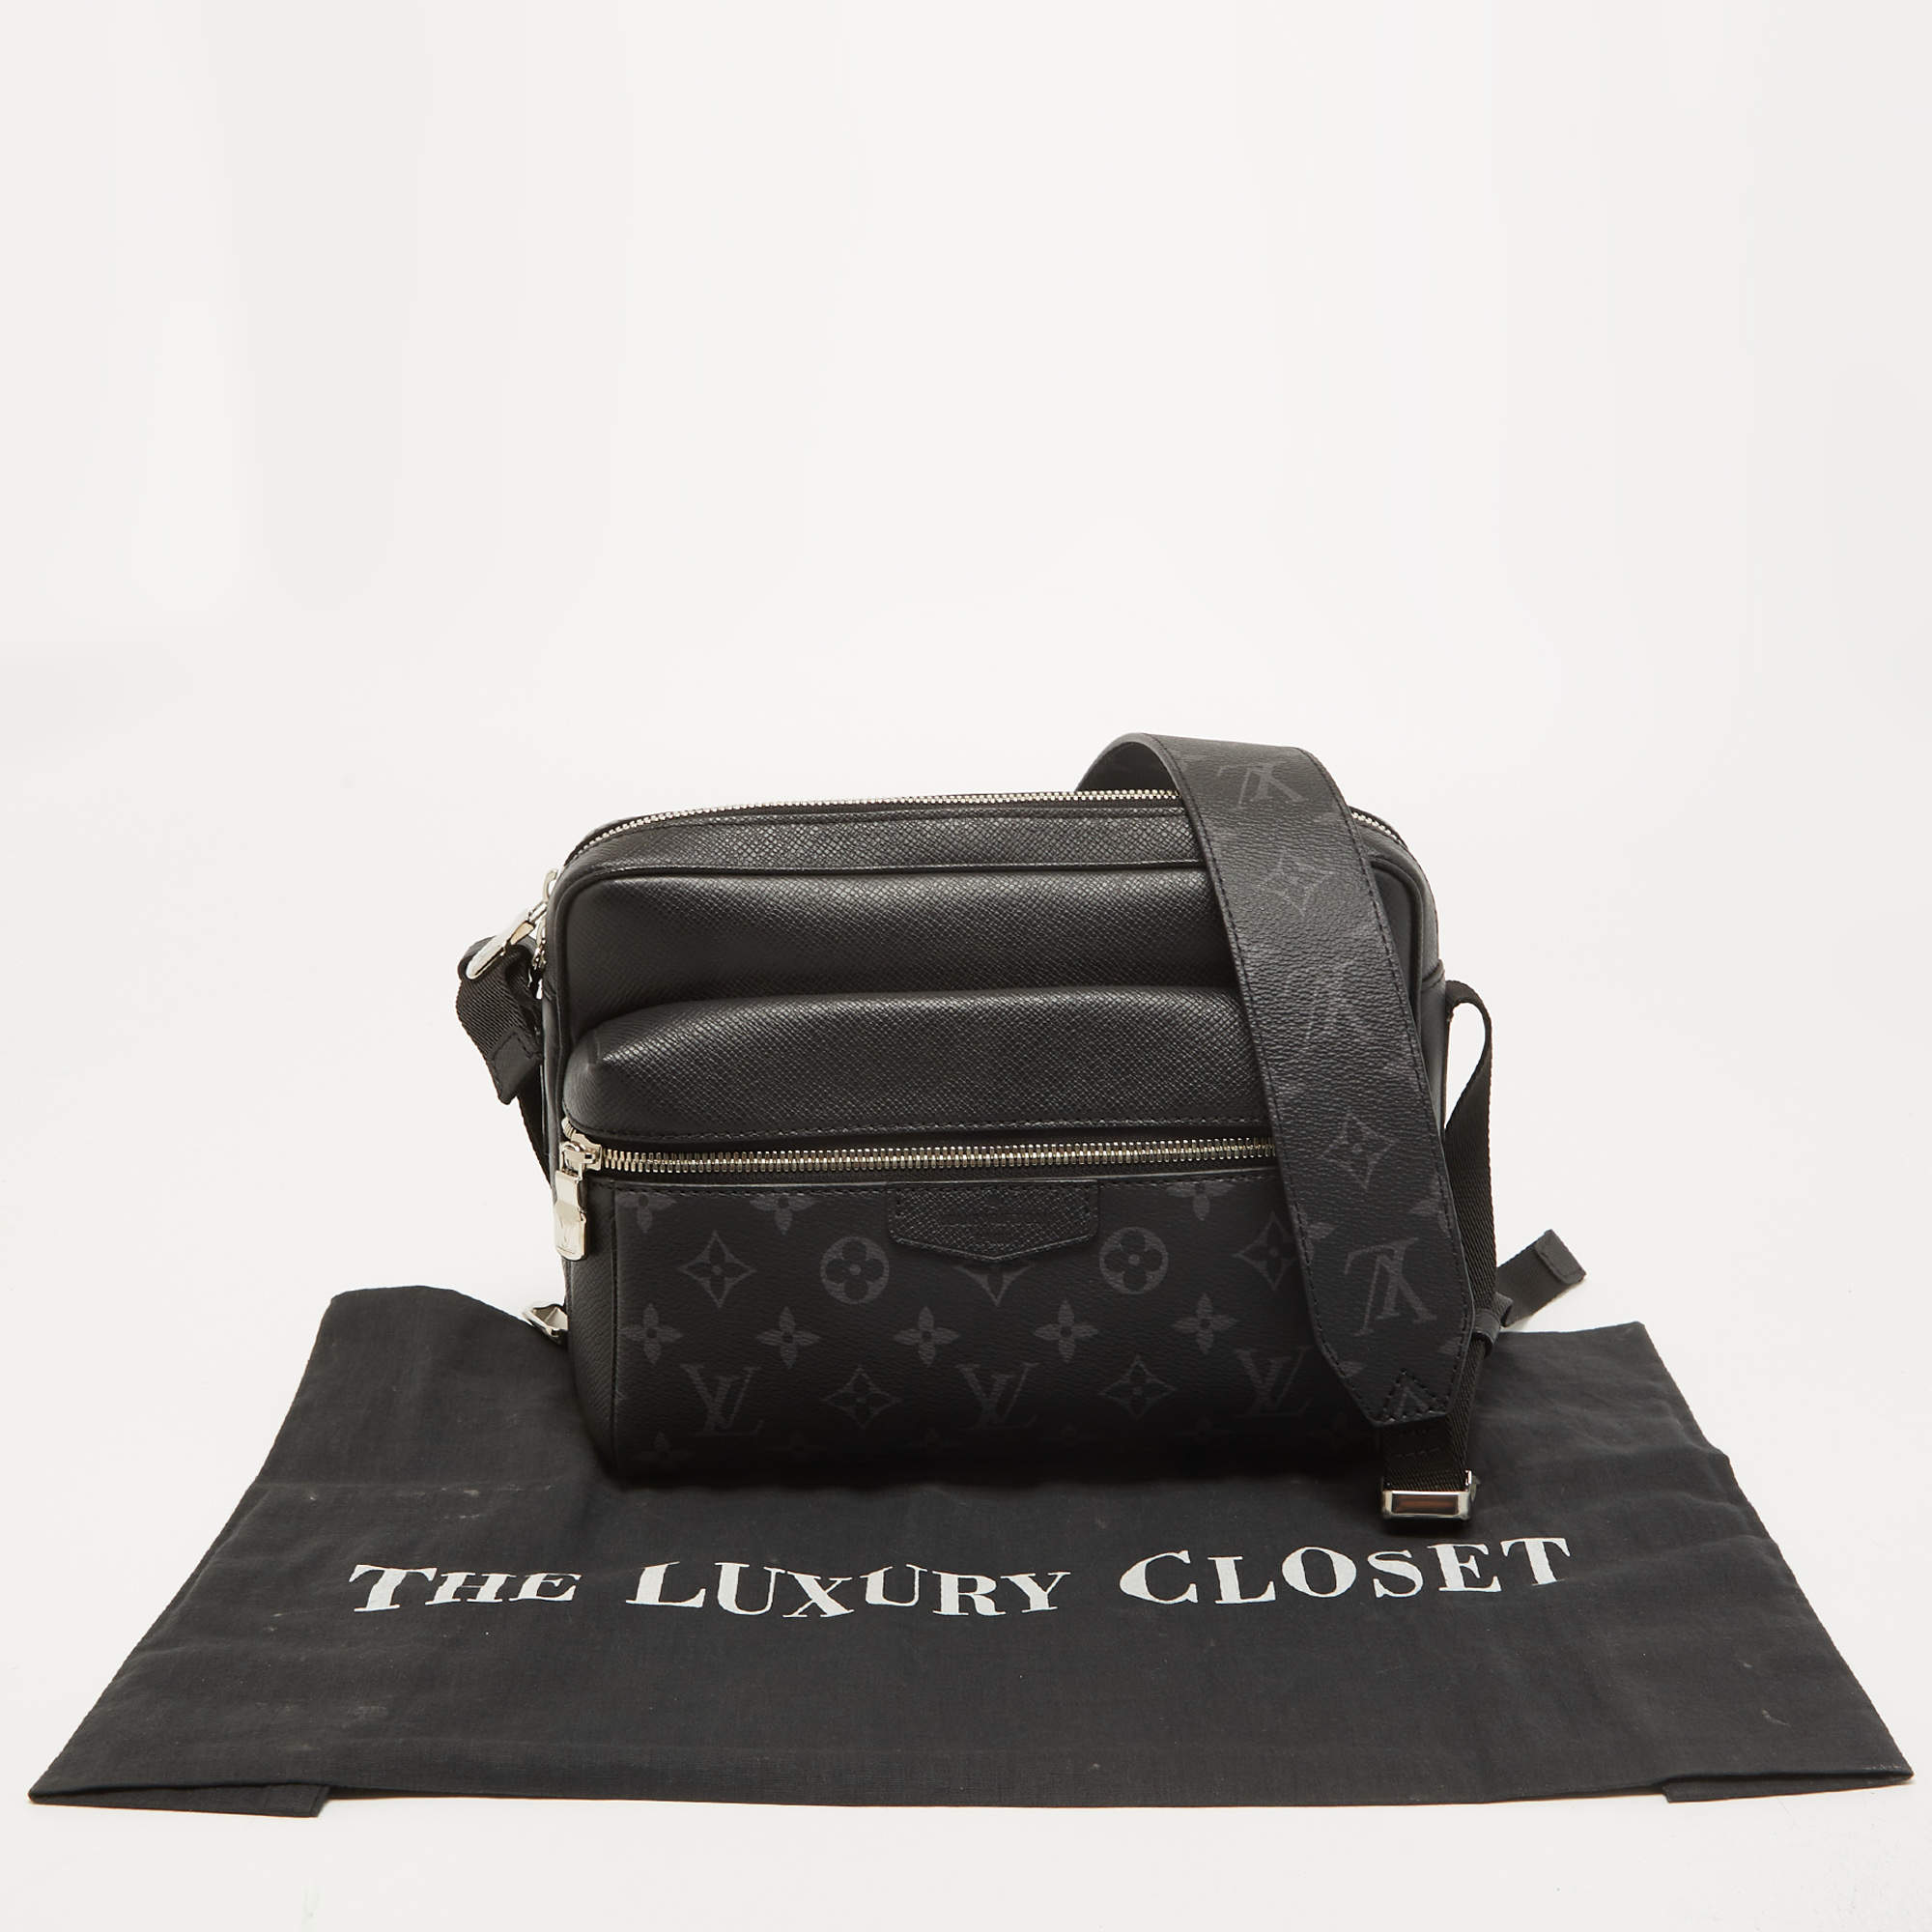 Louis Vuitton Messengerama Black in Monogram Coated Canvas/Taiga Cowhide  Leather with Silver-tone - US